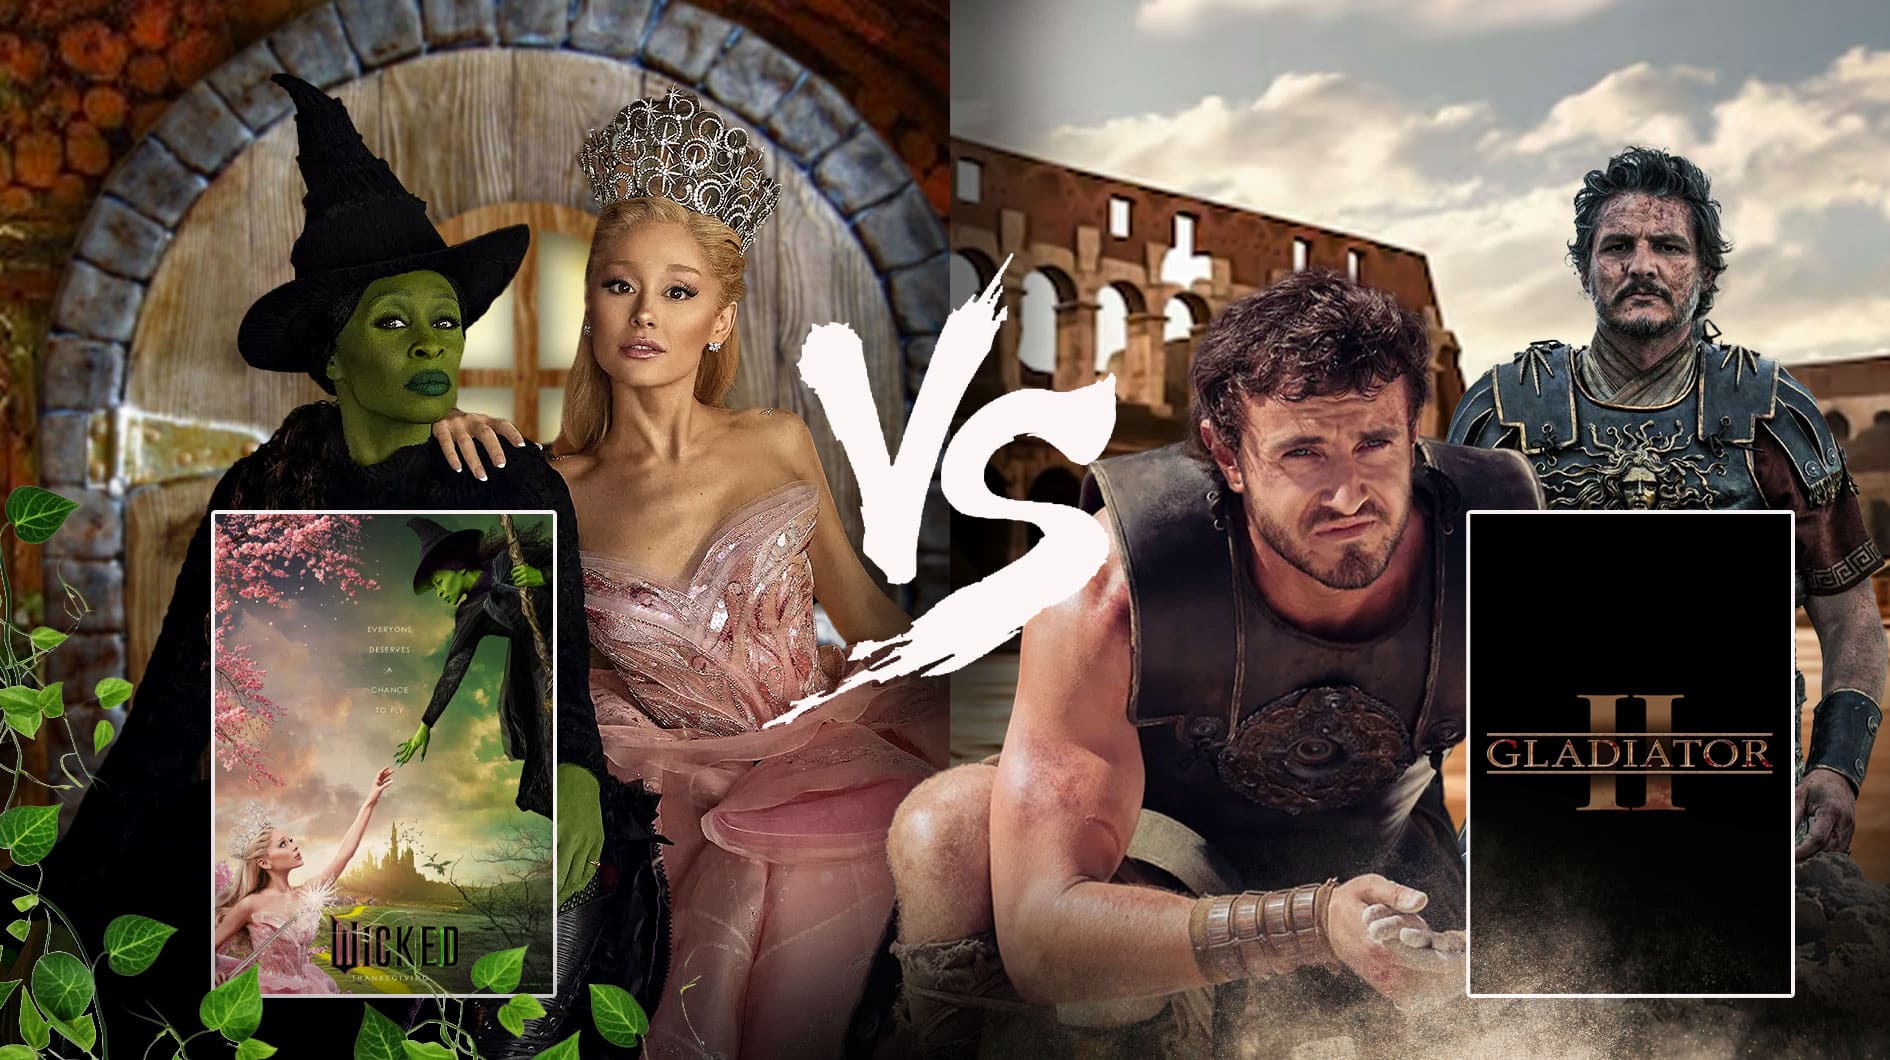 Cynthia Erivo and Ariana Grande as Elphaba and Glinda, background: Wicked poster; Paul Mescal and Pedro Pascal as gladiators, Gladiator II poster